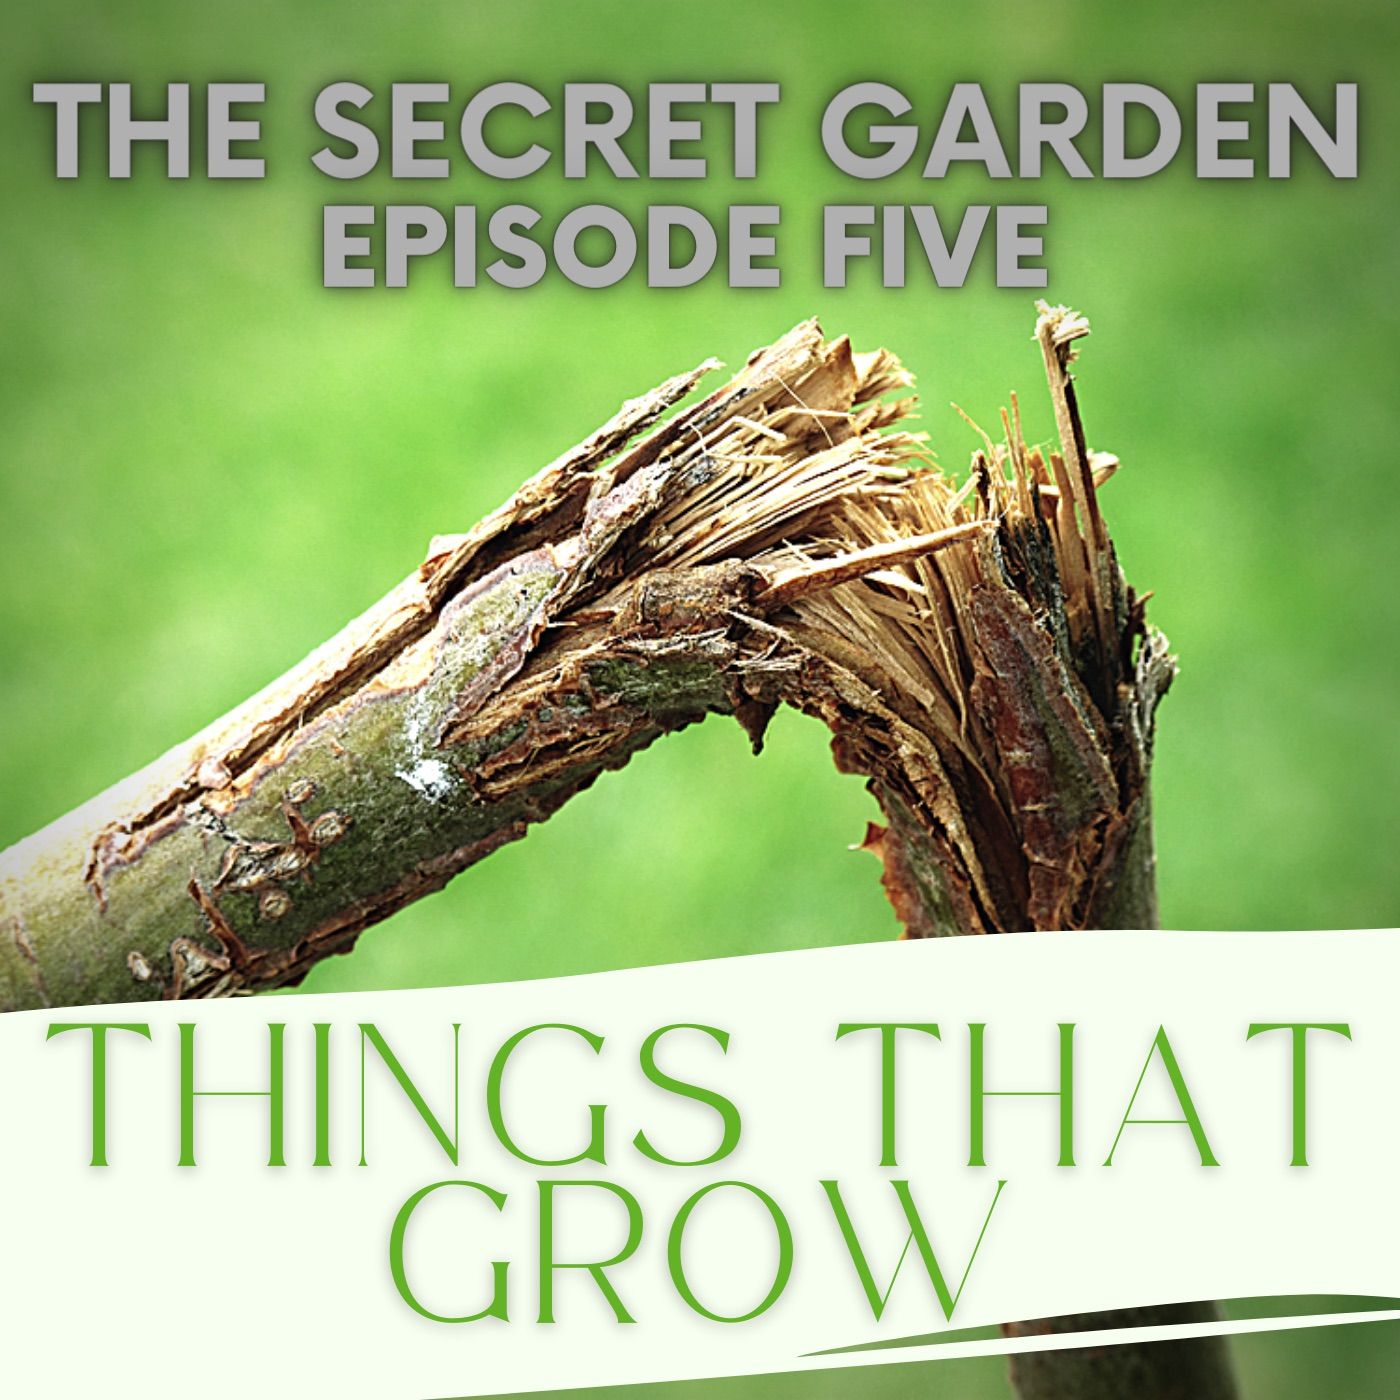 5. Things That Grow